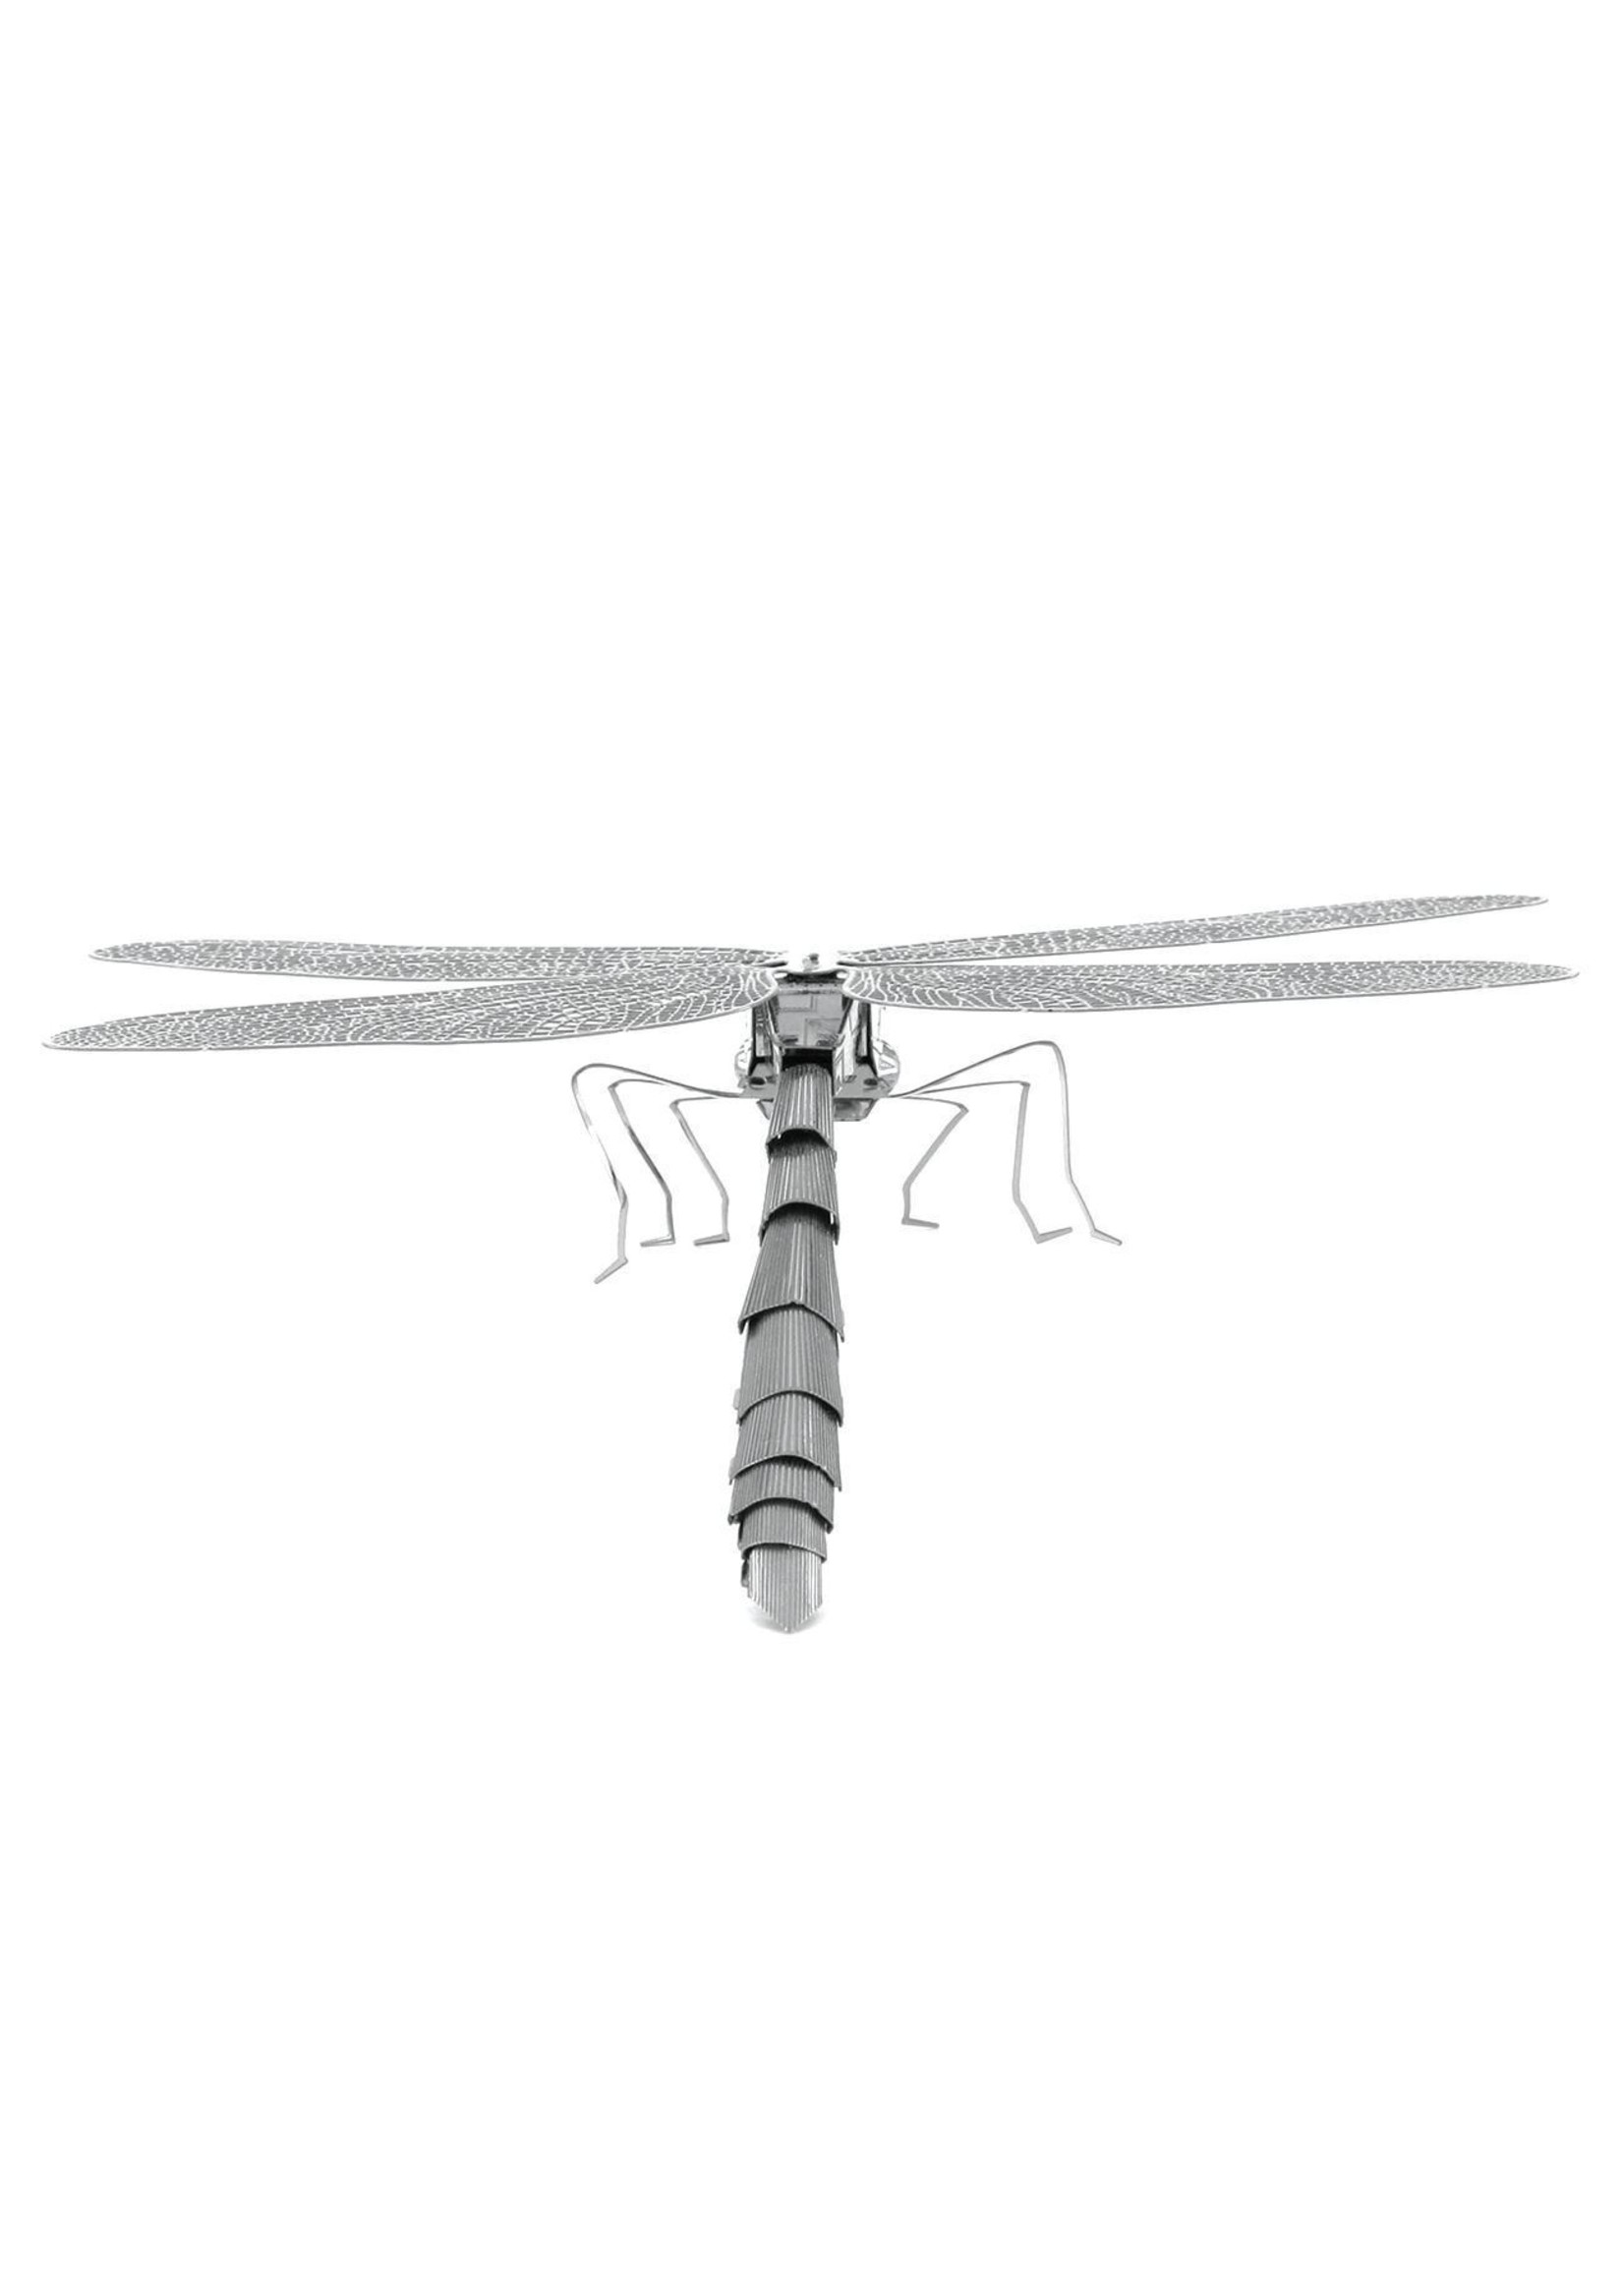 Fascinations Metal Earth - Dragonfly